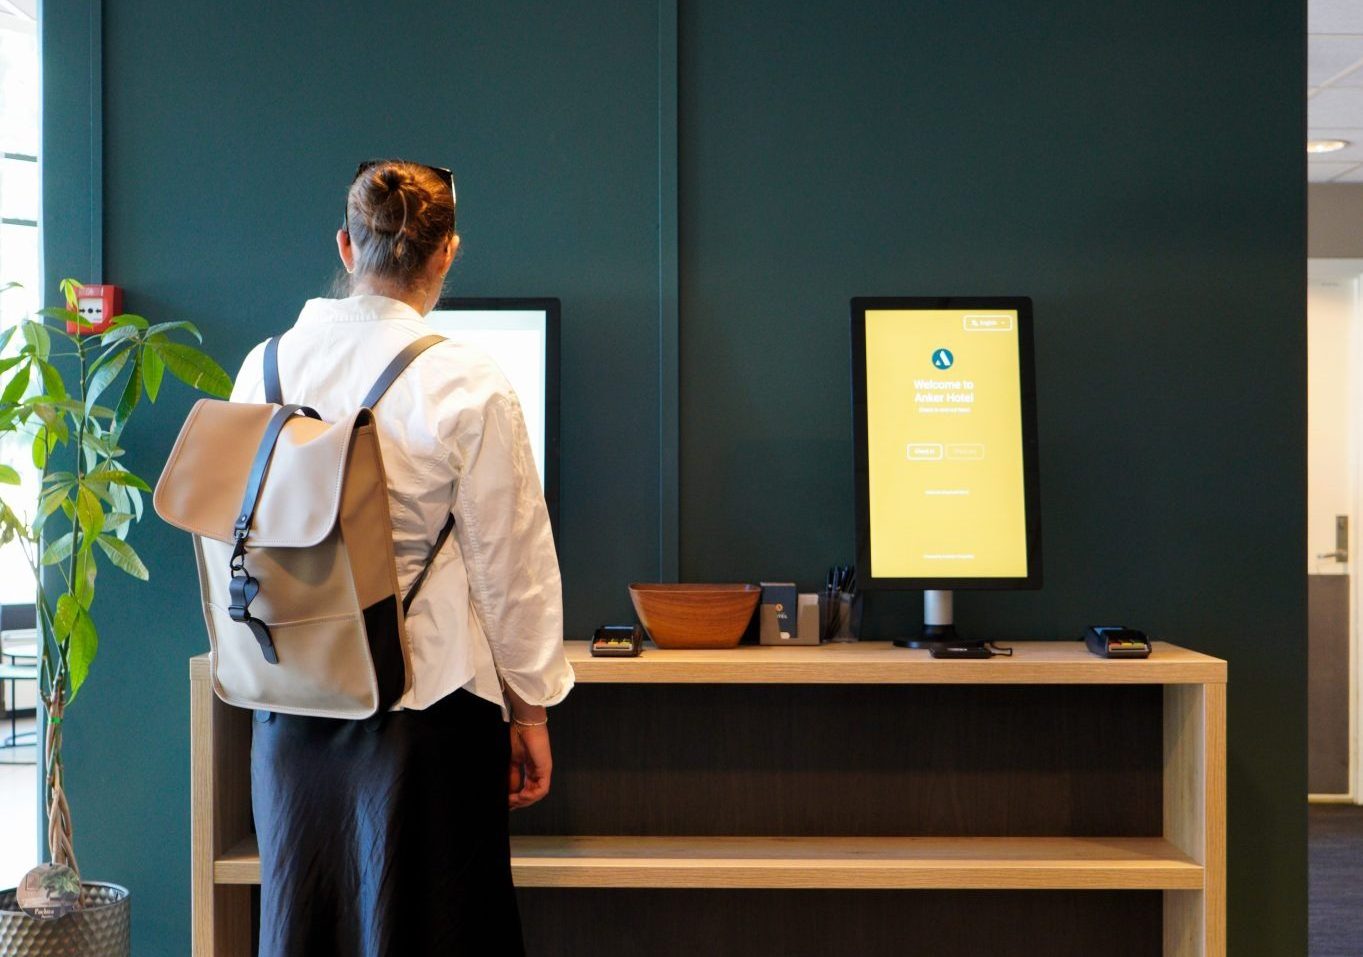 Anker Hotel meeting the future with self check-in